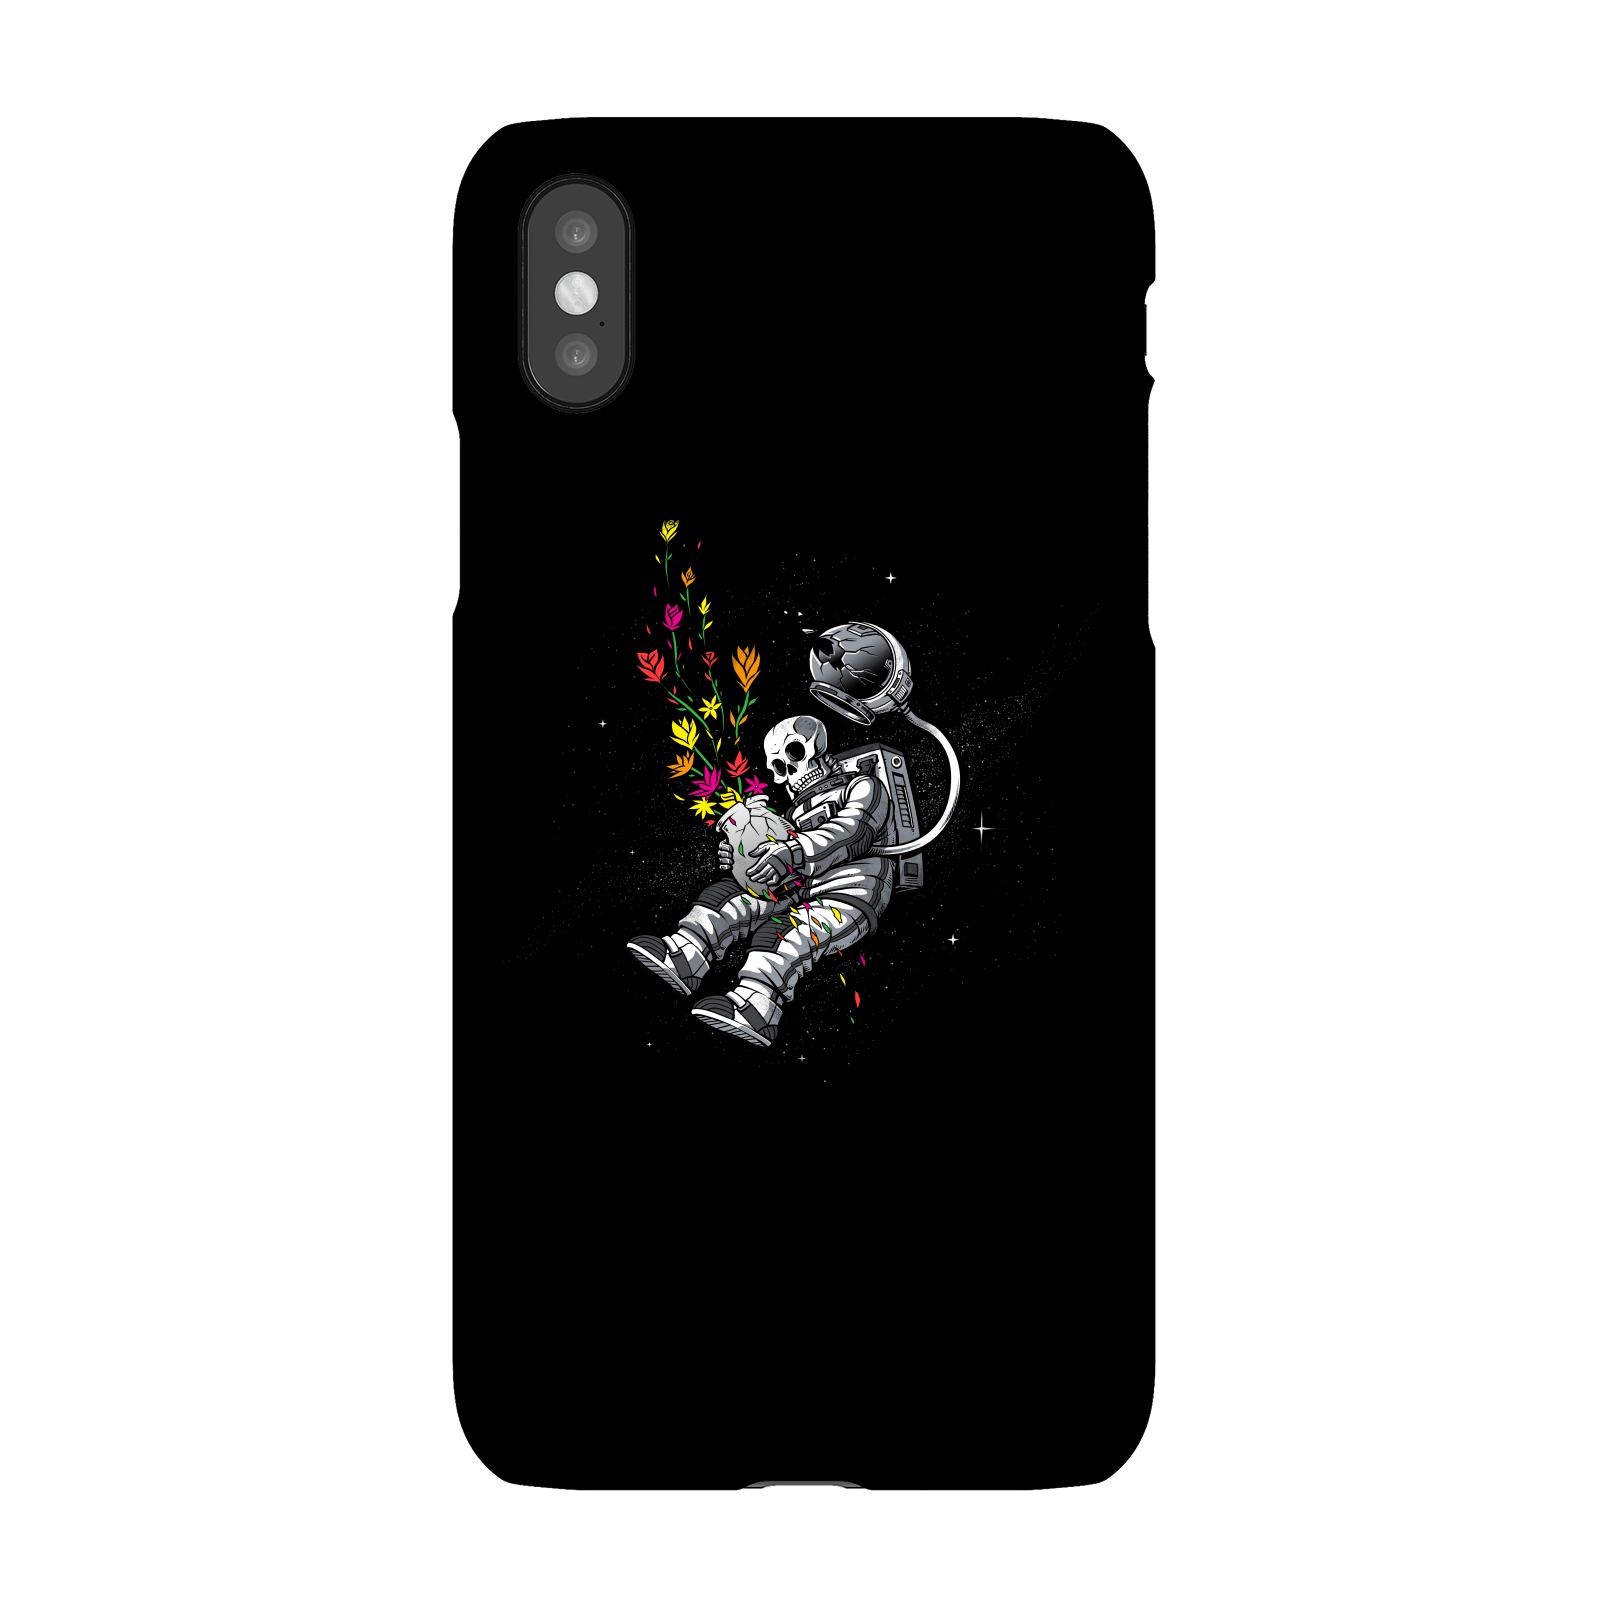 End Of Humanity Phone Case for iPhone and Android - iPhone 6 Plus - Snap Case - Matte